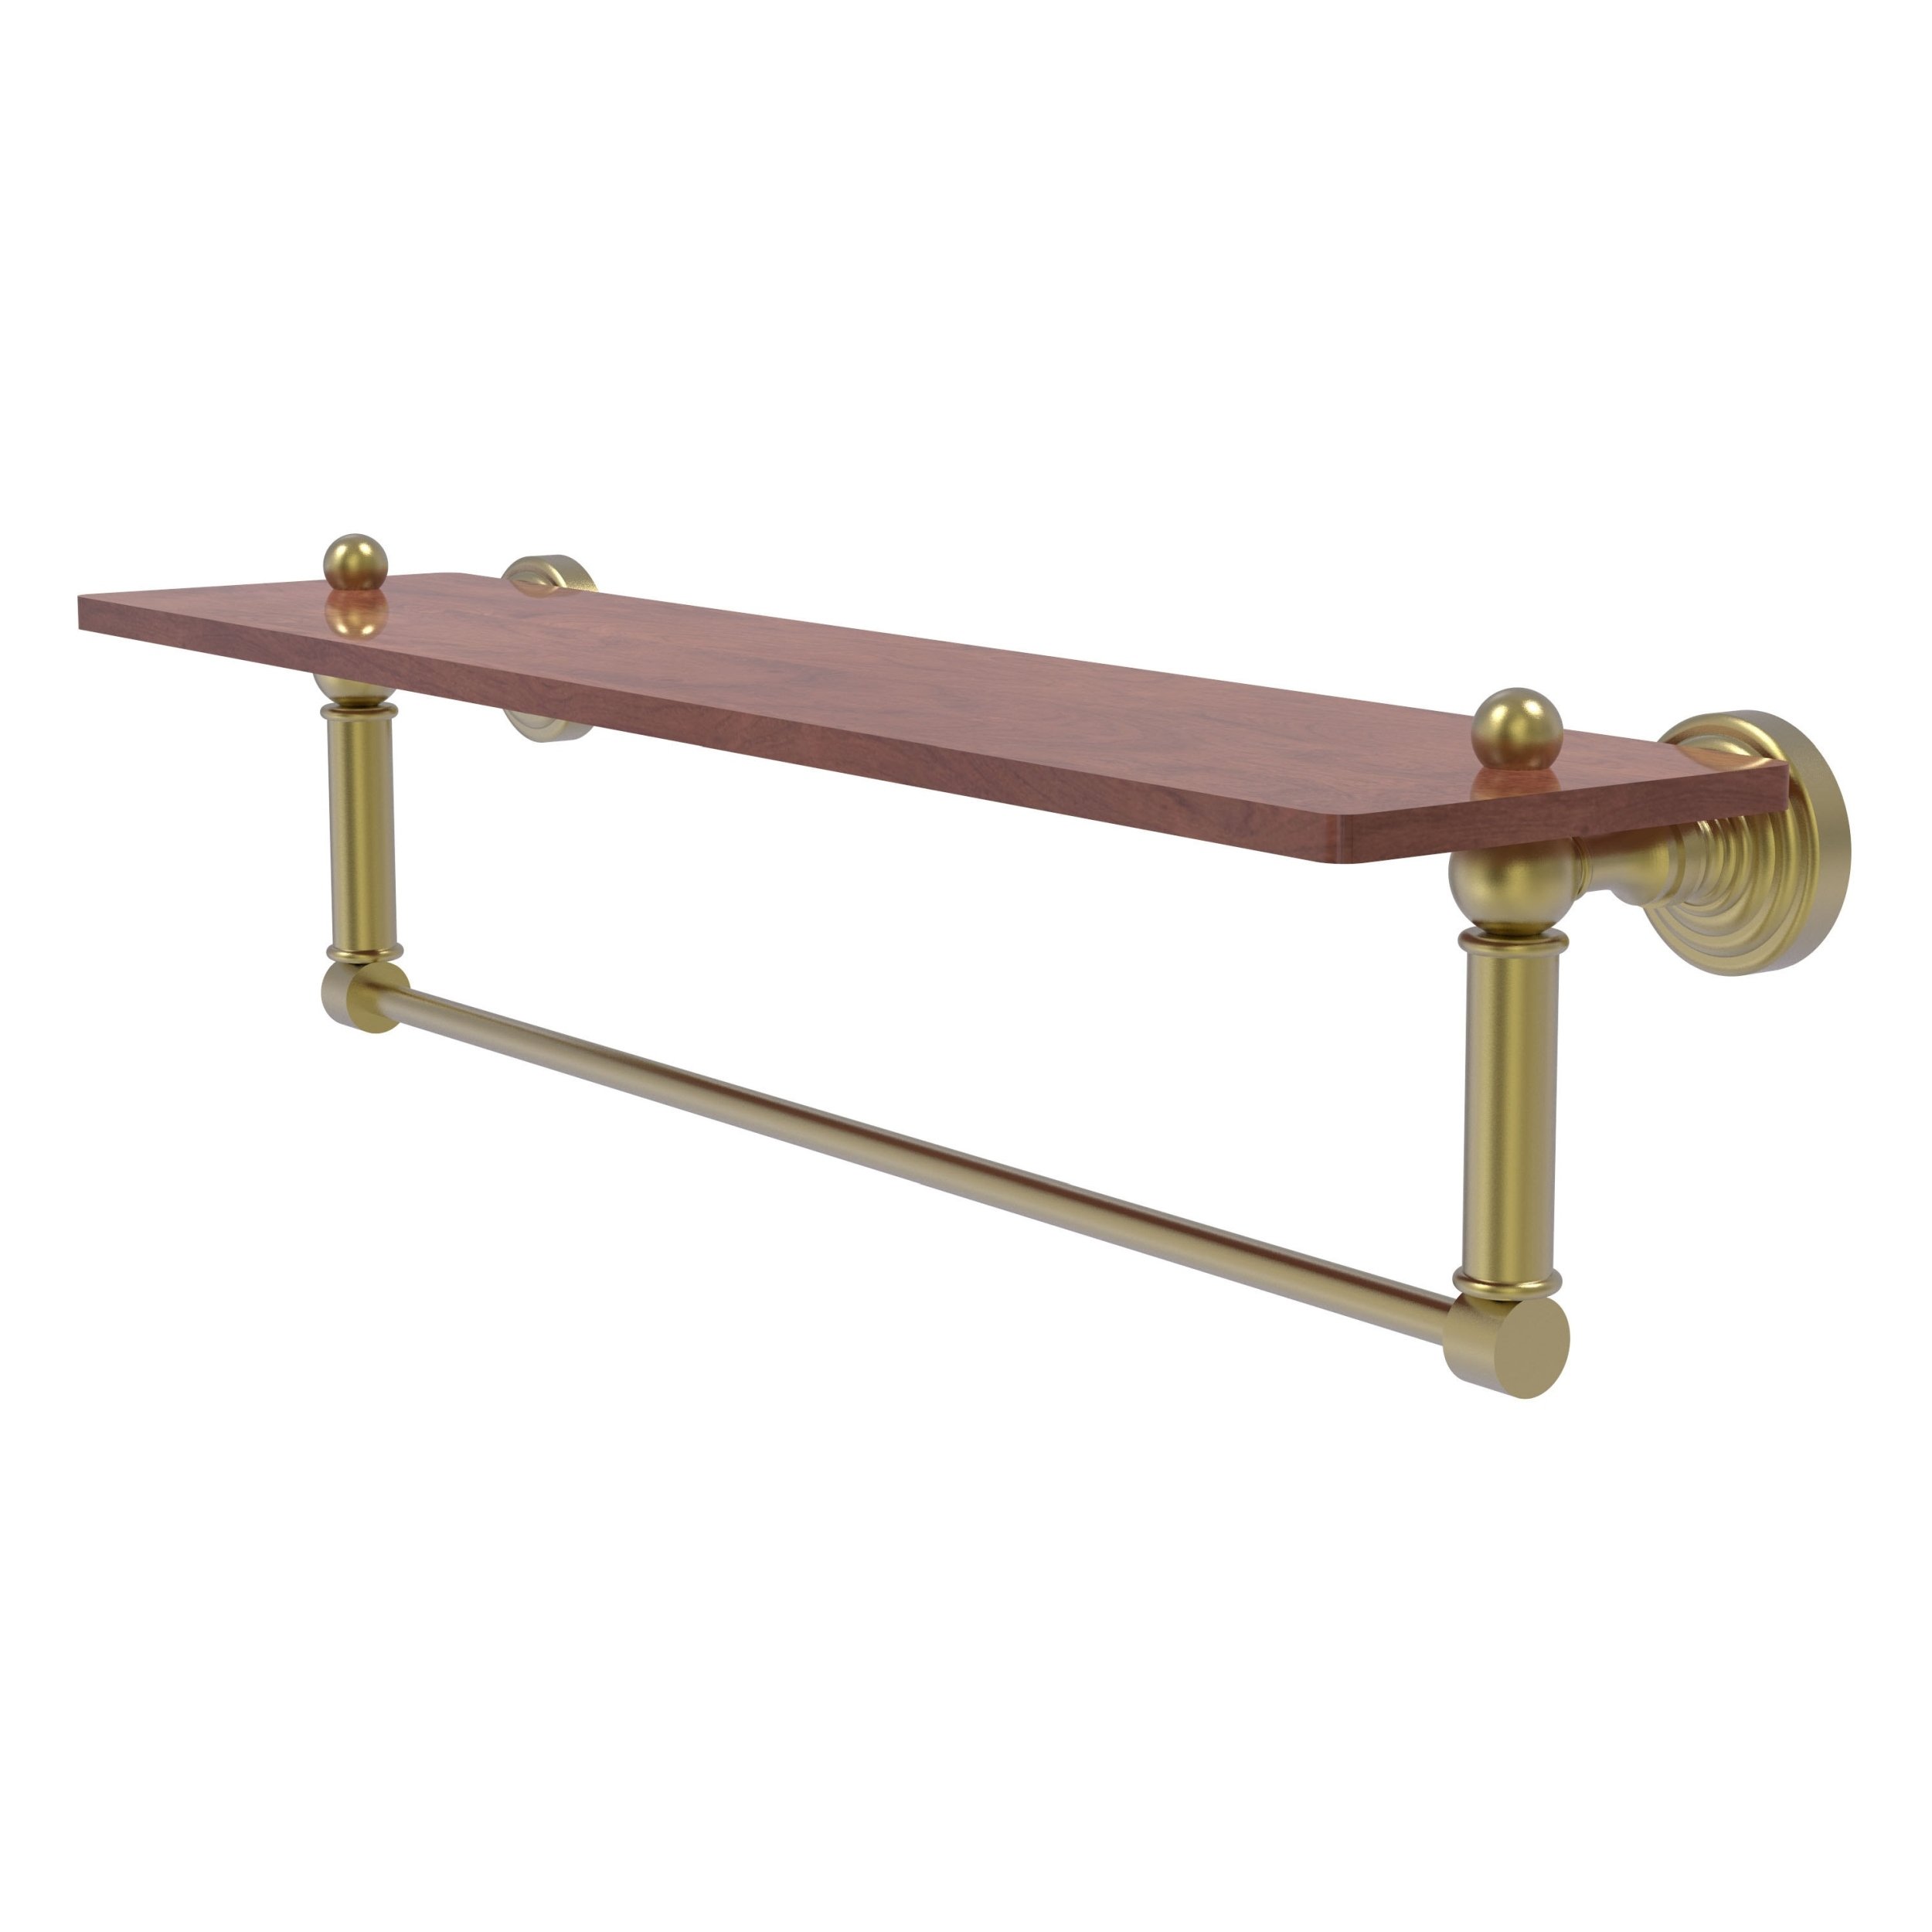 Waverly Place Collection Solid IPE Ironwood Shelf with Integrated Towel Bar - Satin Brass / 22 Inch - image 1 of 2